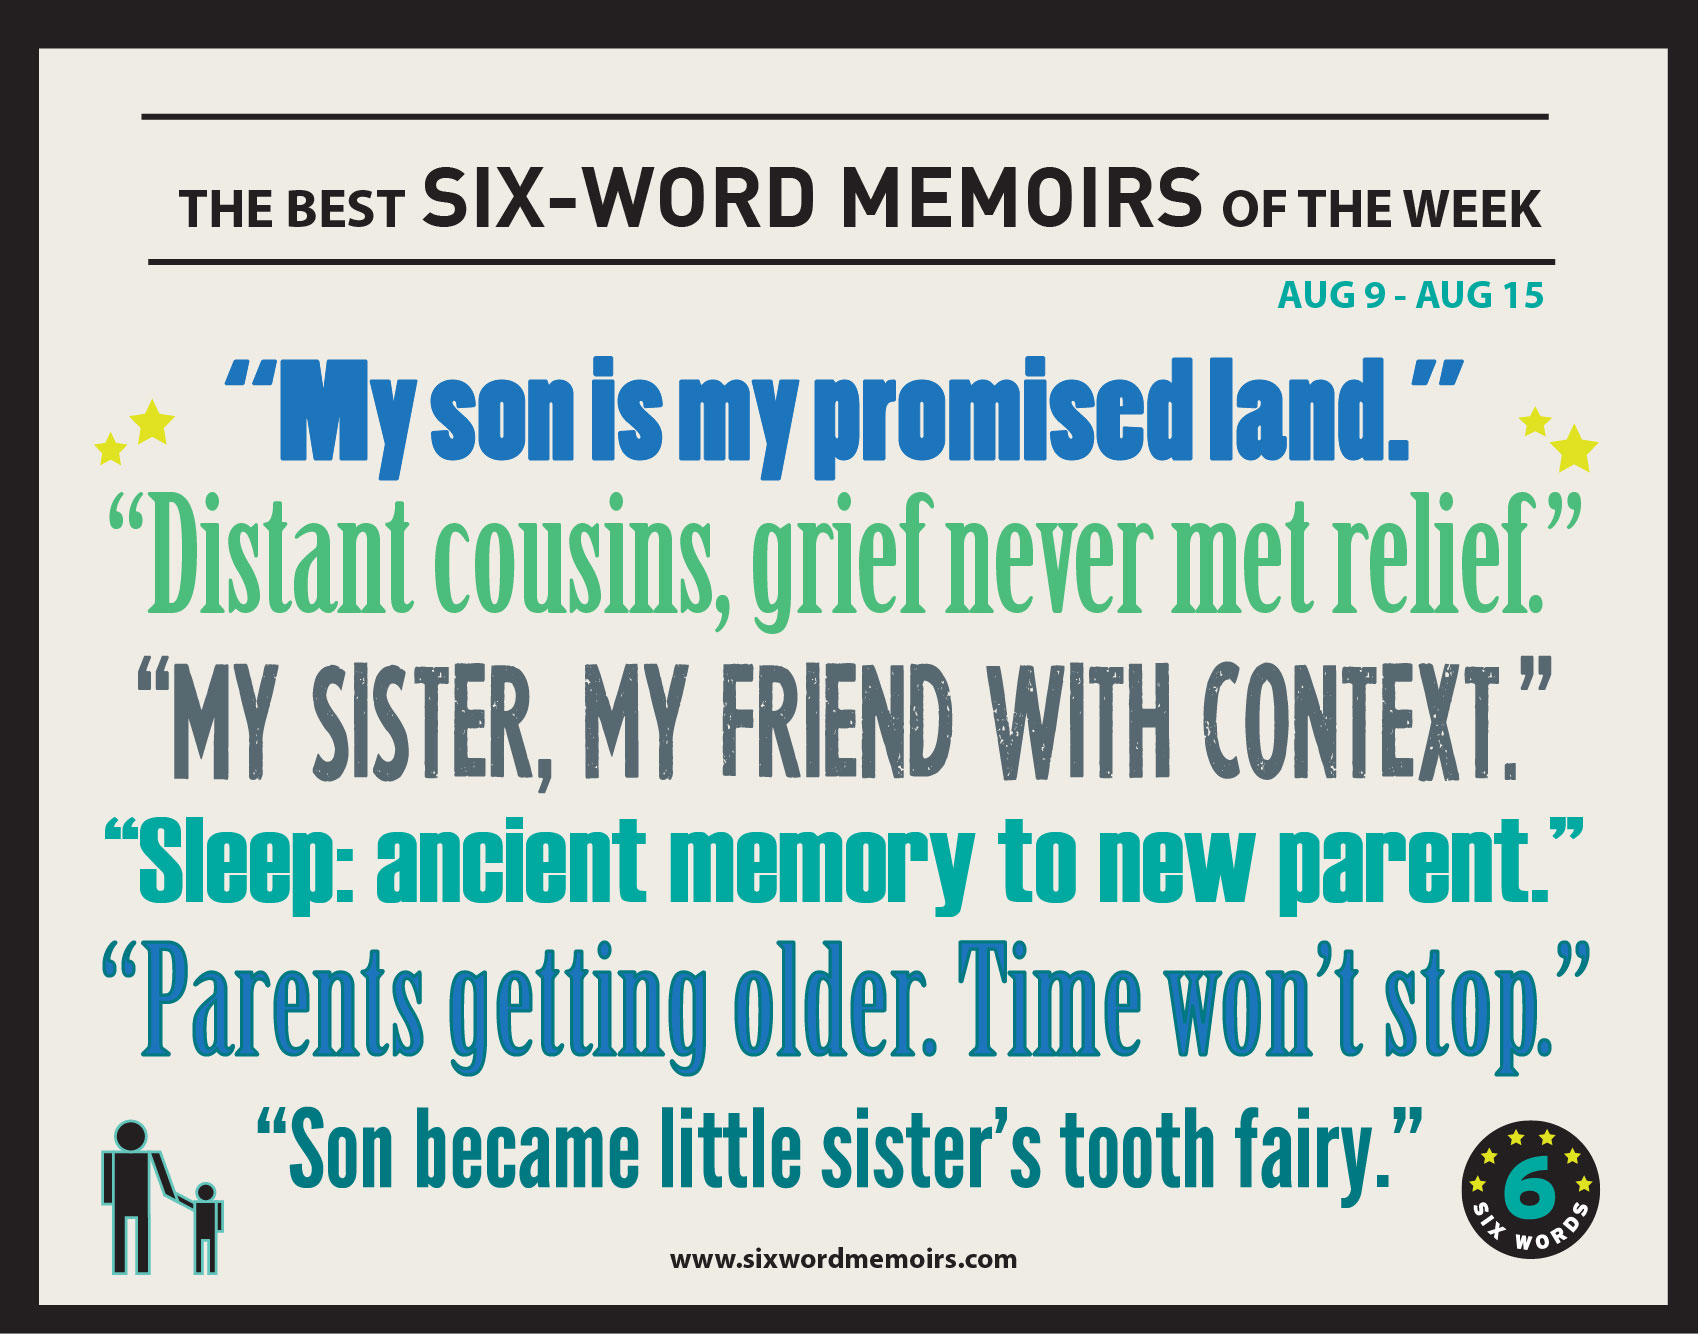 6 words текст. 6 Words Memoir. Six Word Memoirs School year. Six-Word Memoir that reflects what you prioritize in role.